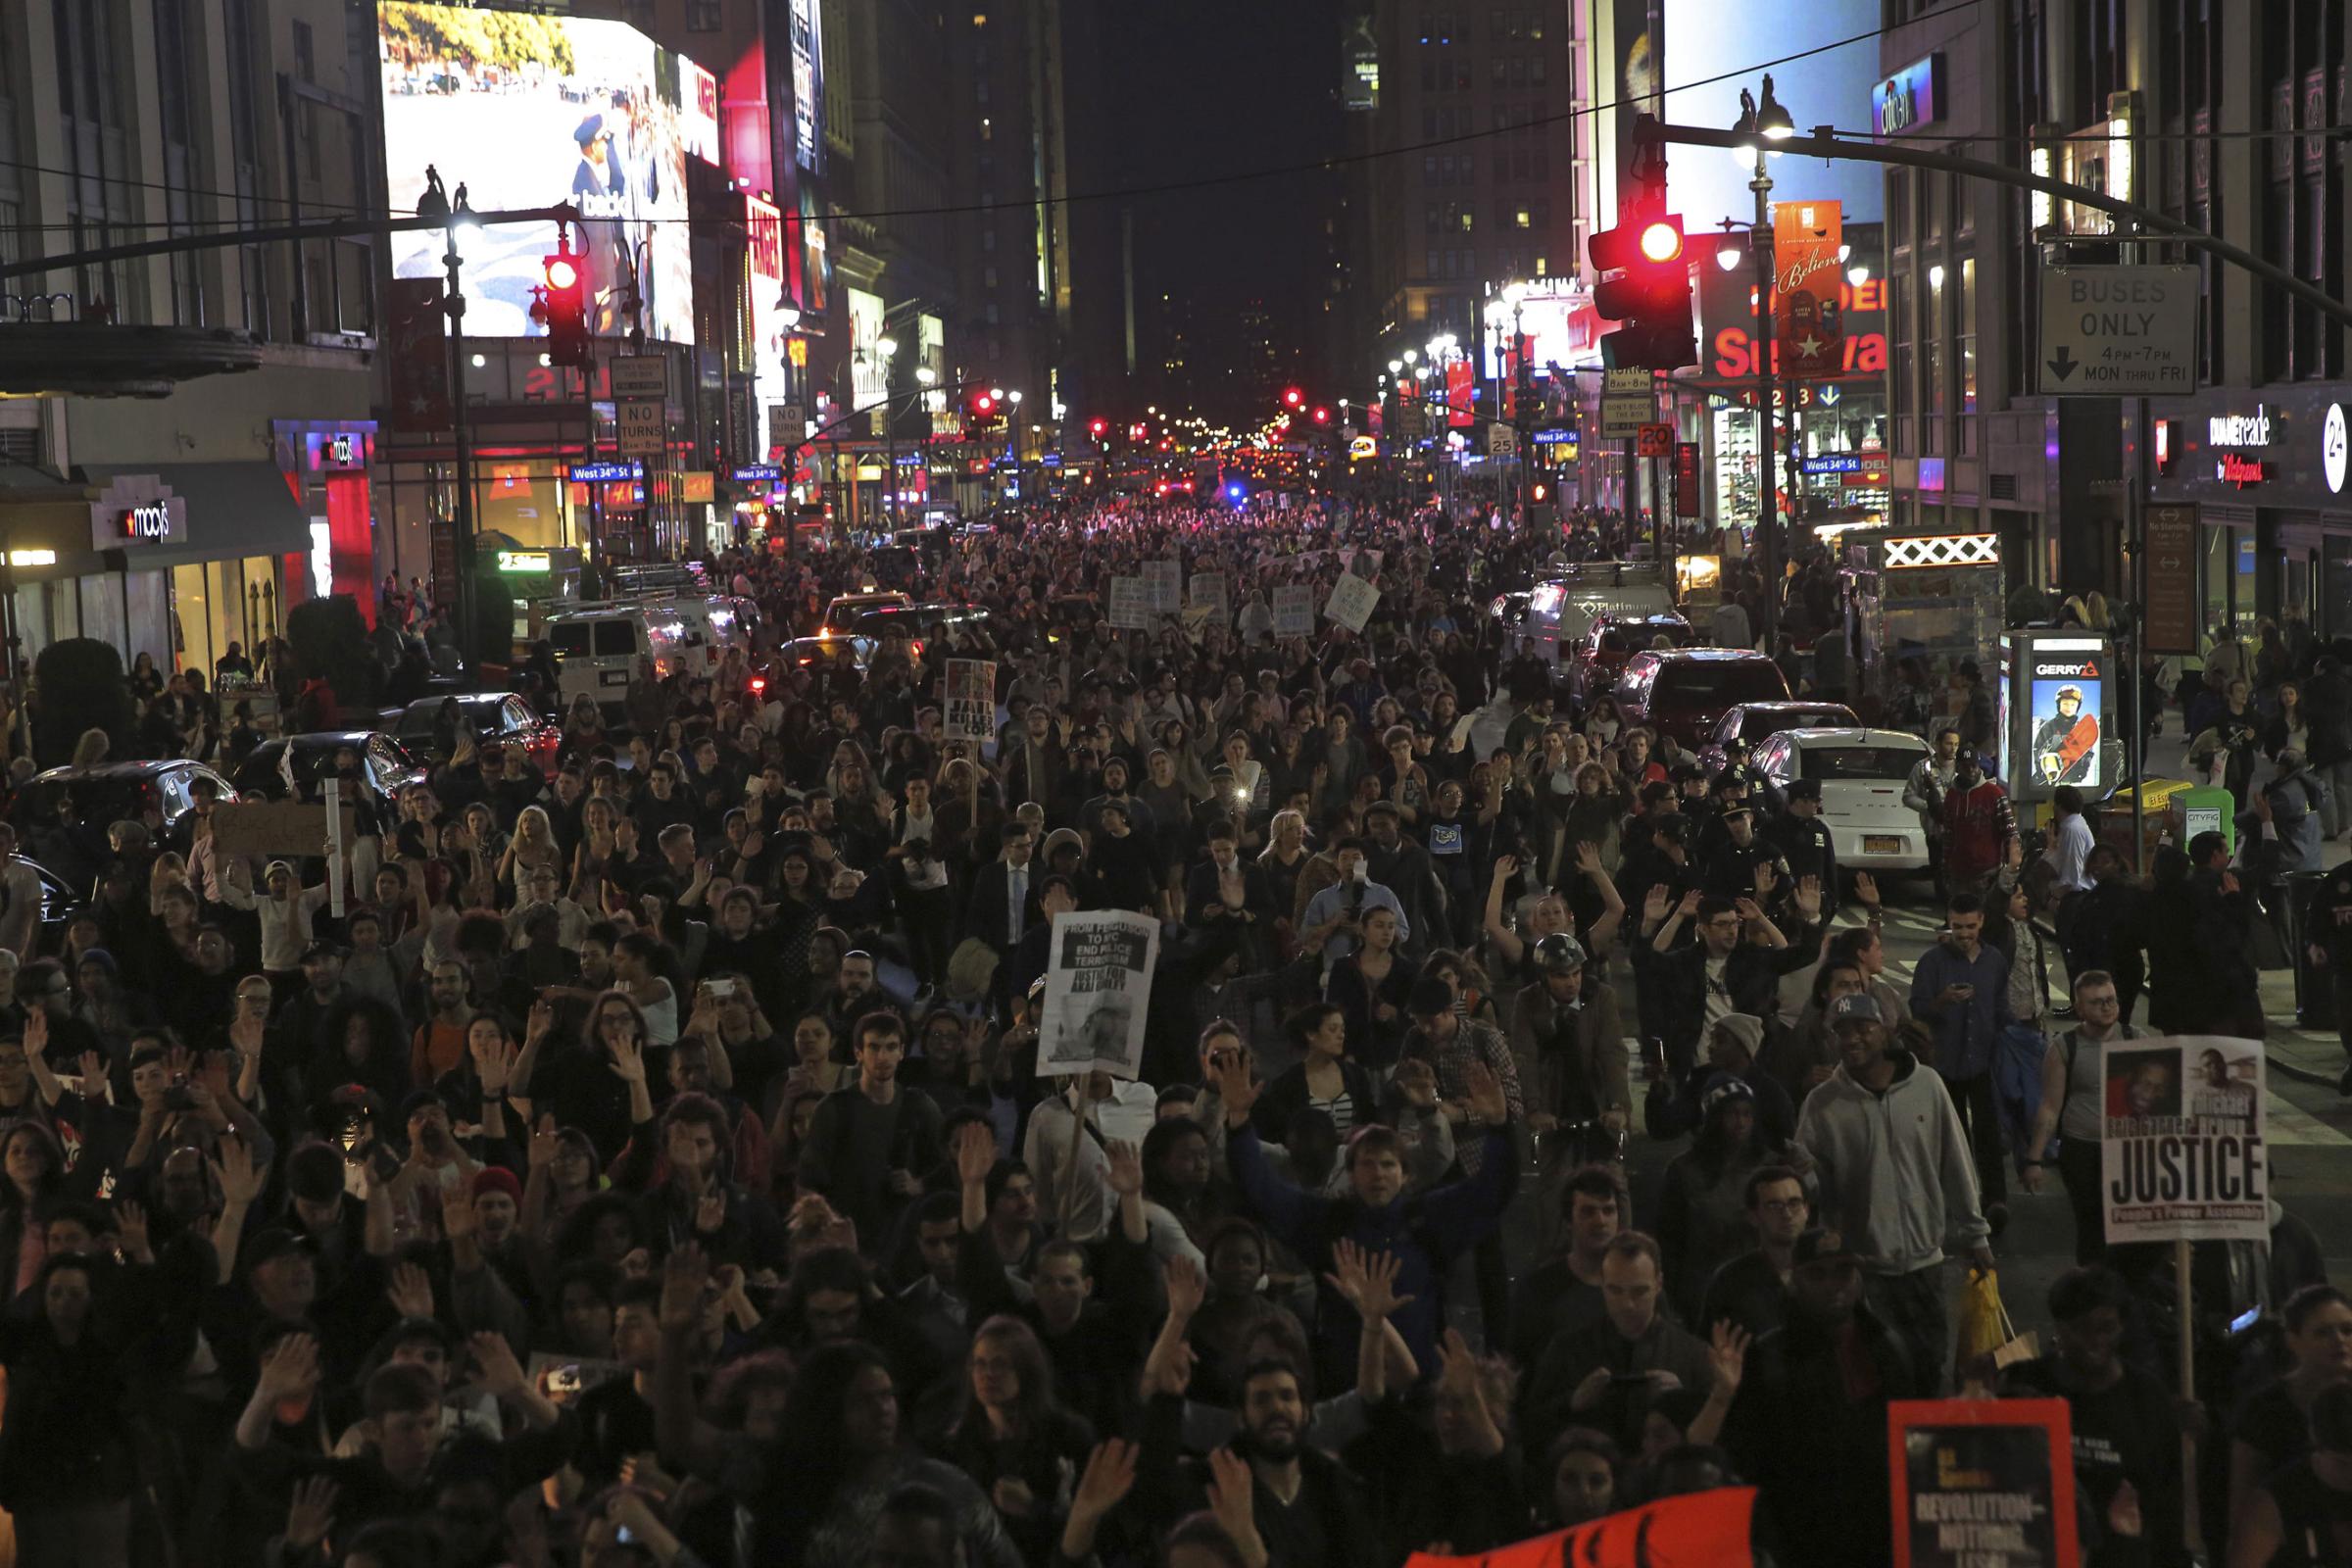 Protesters march near Times Square in New York City on Nov. 24, 2014.